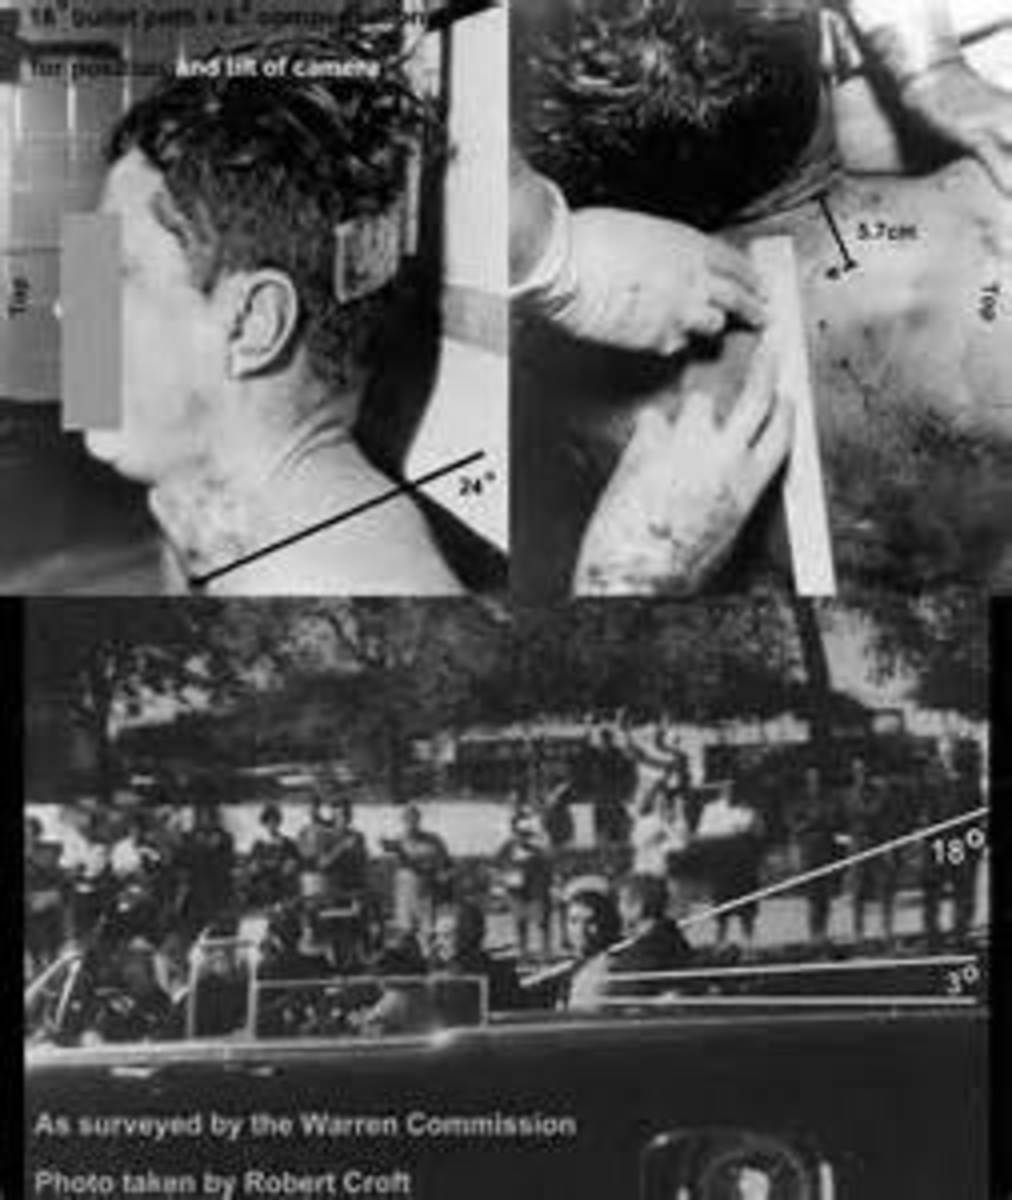 Photos From The Dead Body Of President Kennedy. 